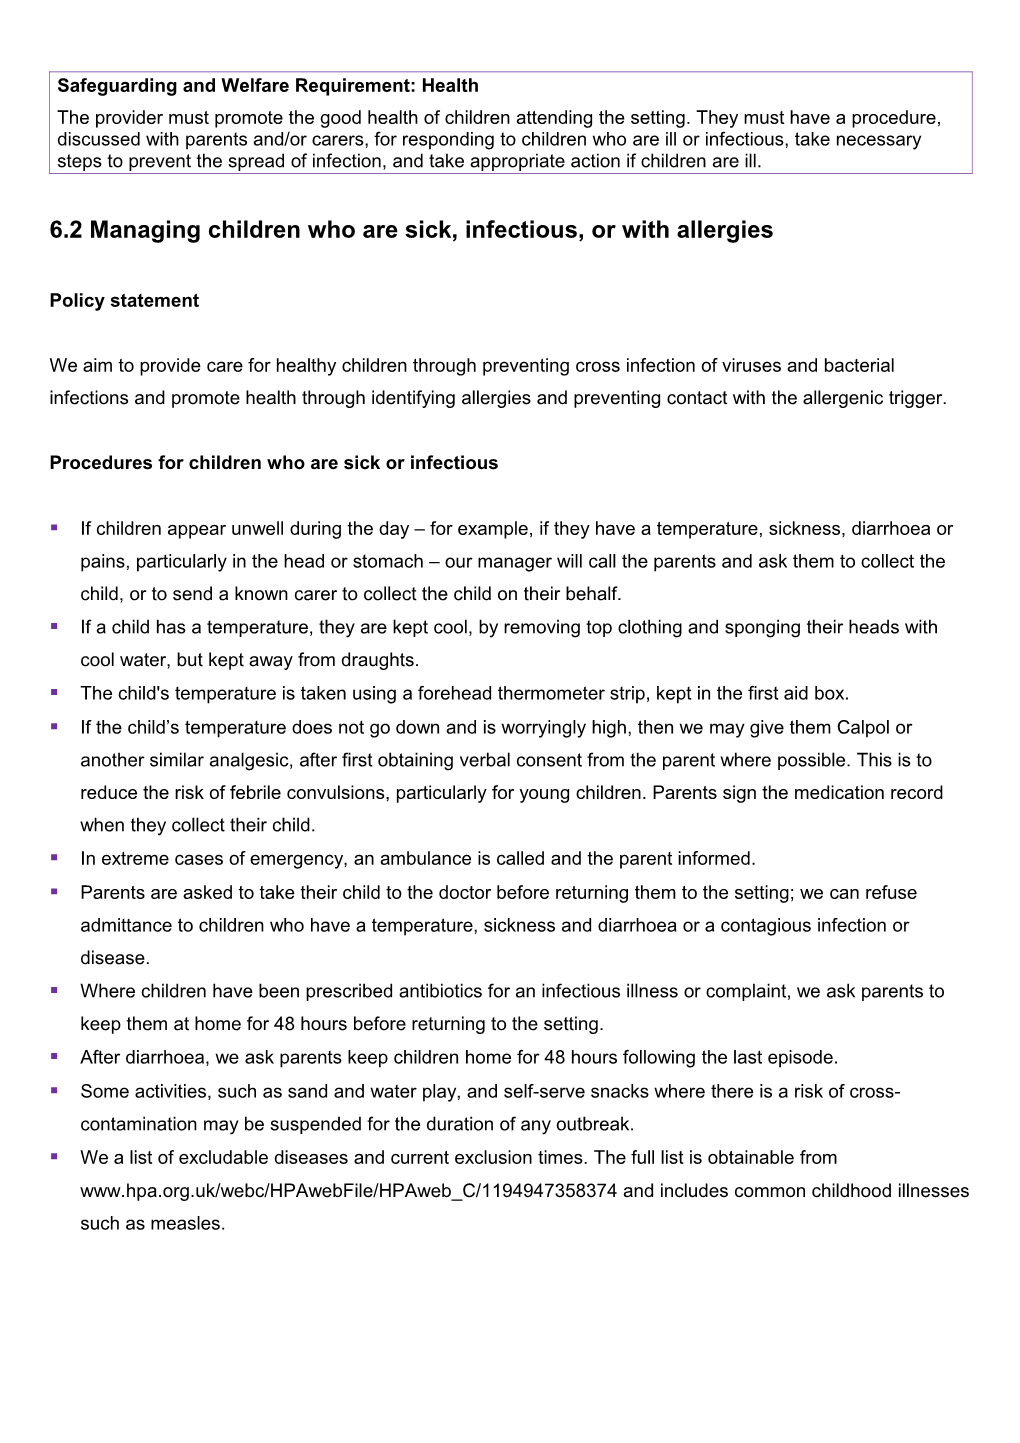 6.2Managing Children Who Are Sick, Infectious, Or with Allergies